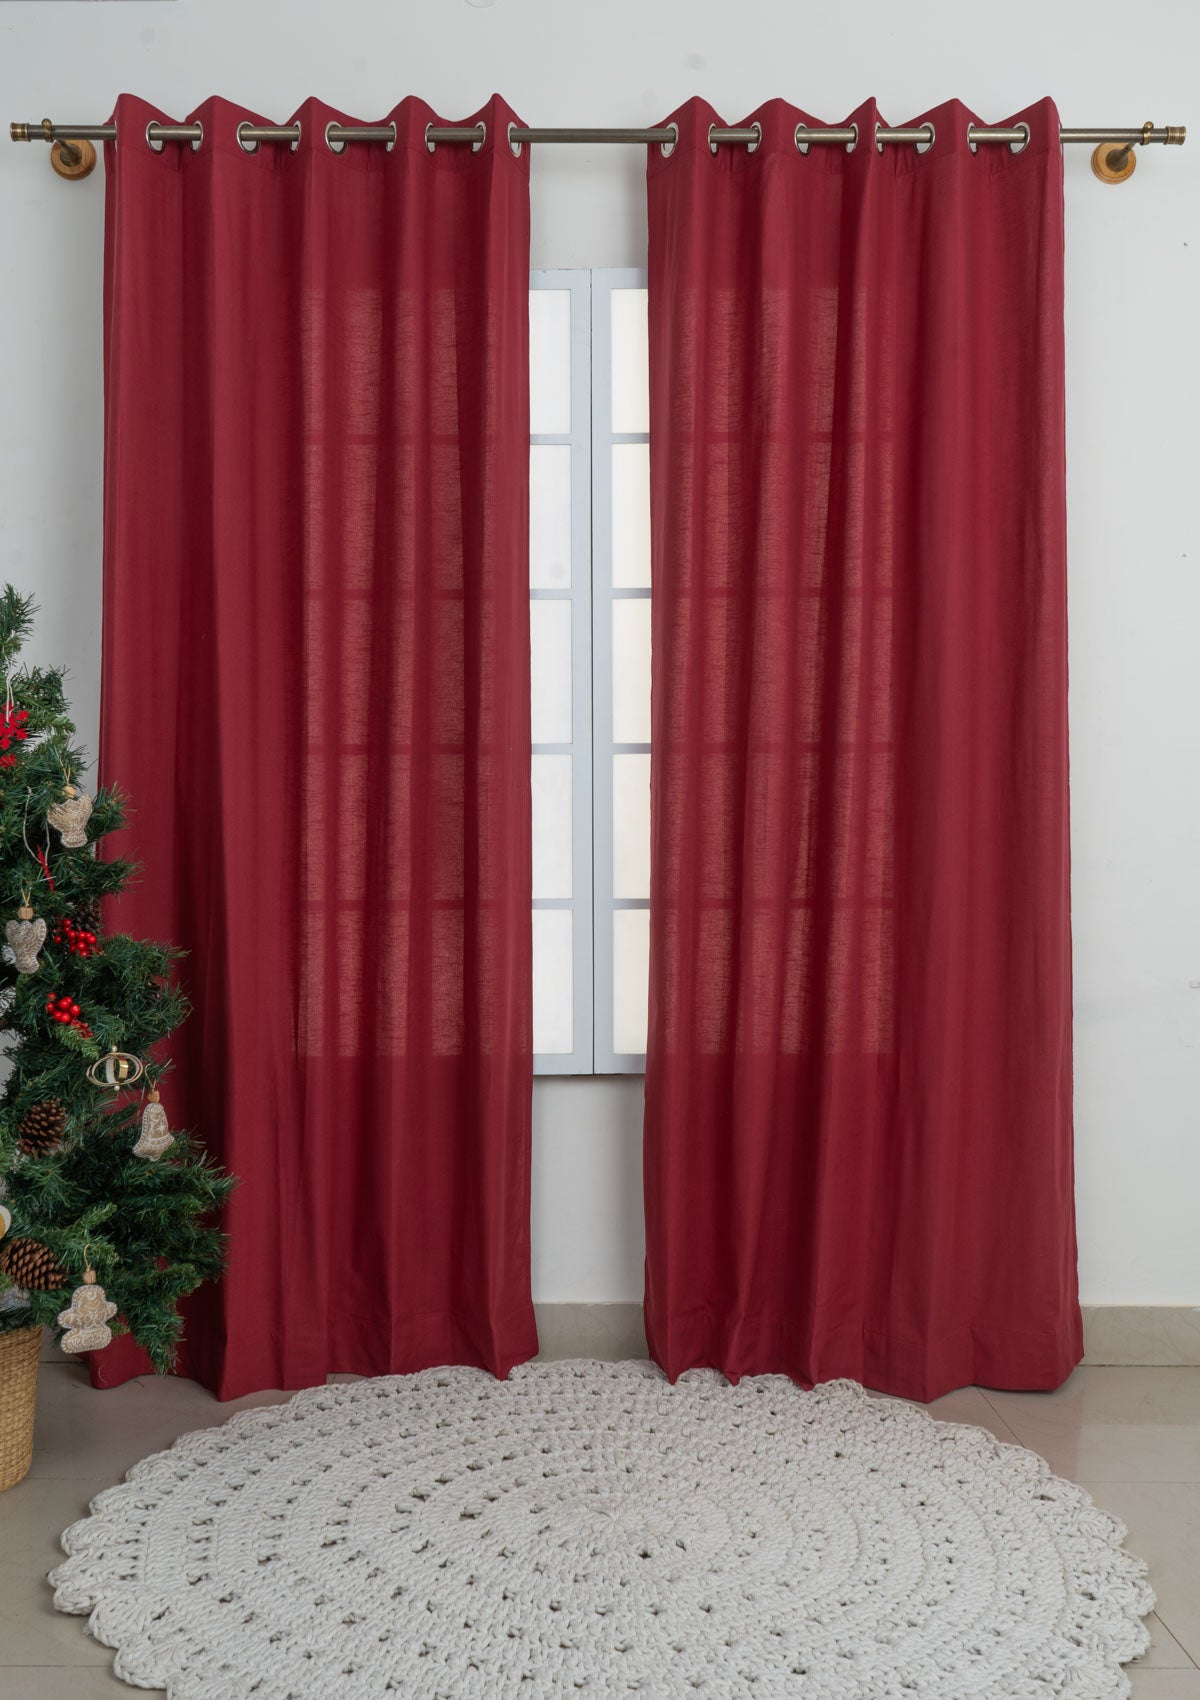 Solid Wine red 100% Customizable Cotton plain curtain for bedroom - Room darkening